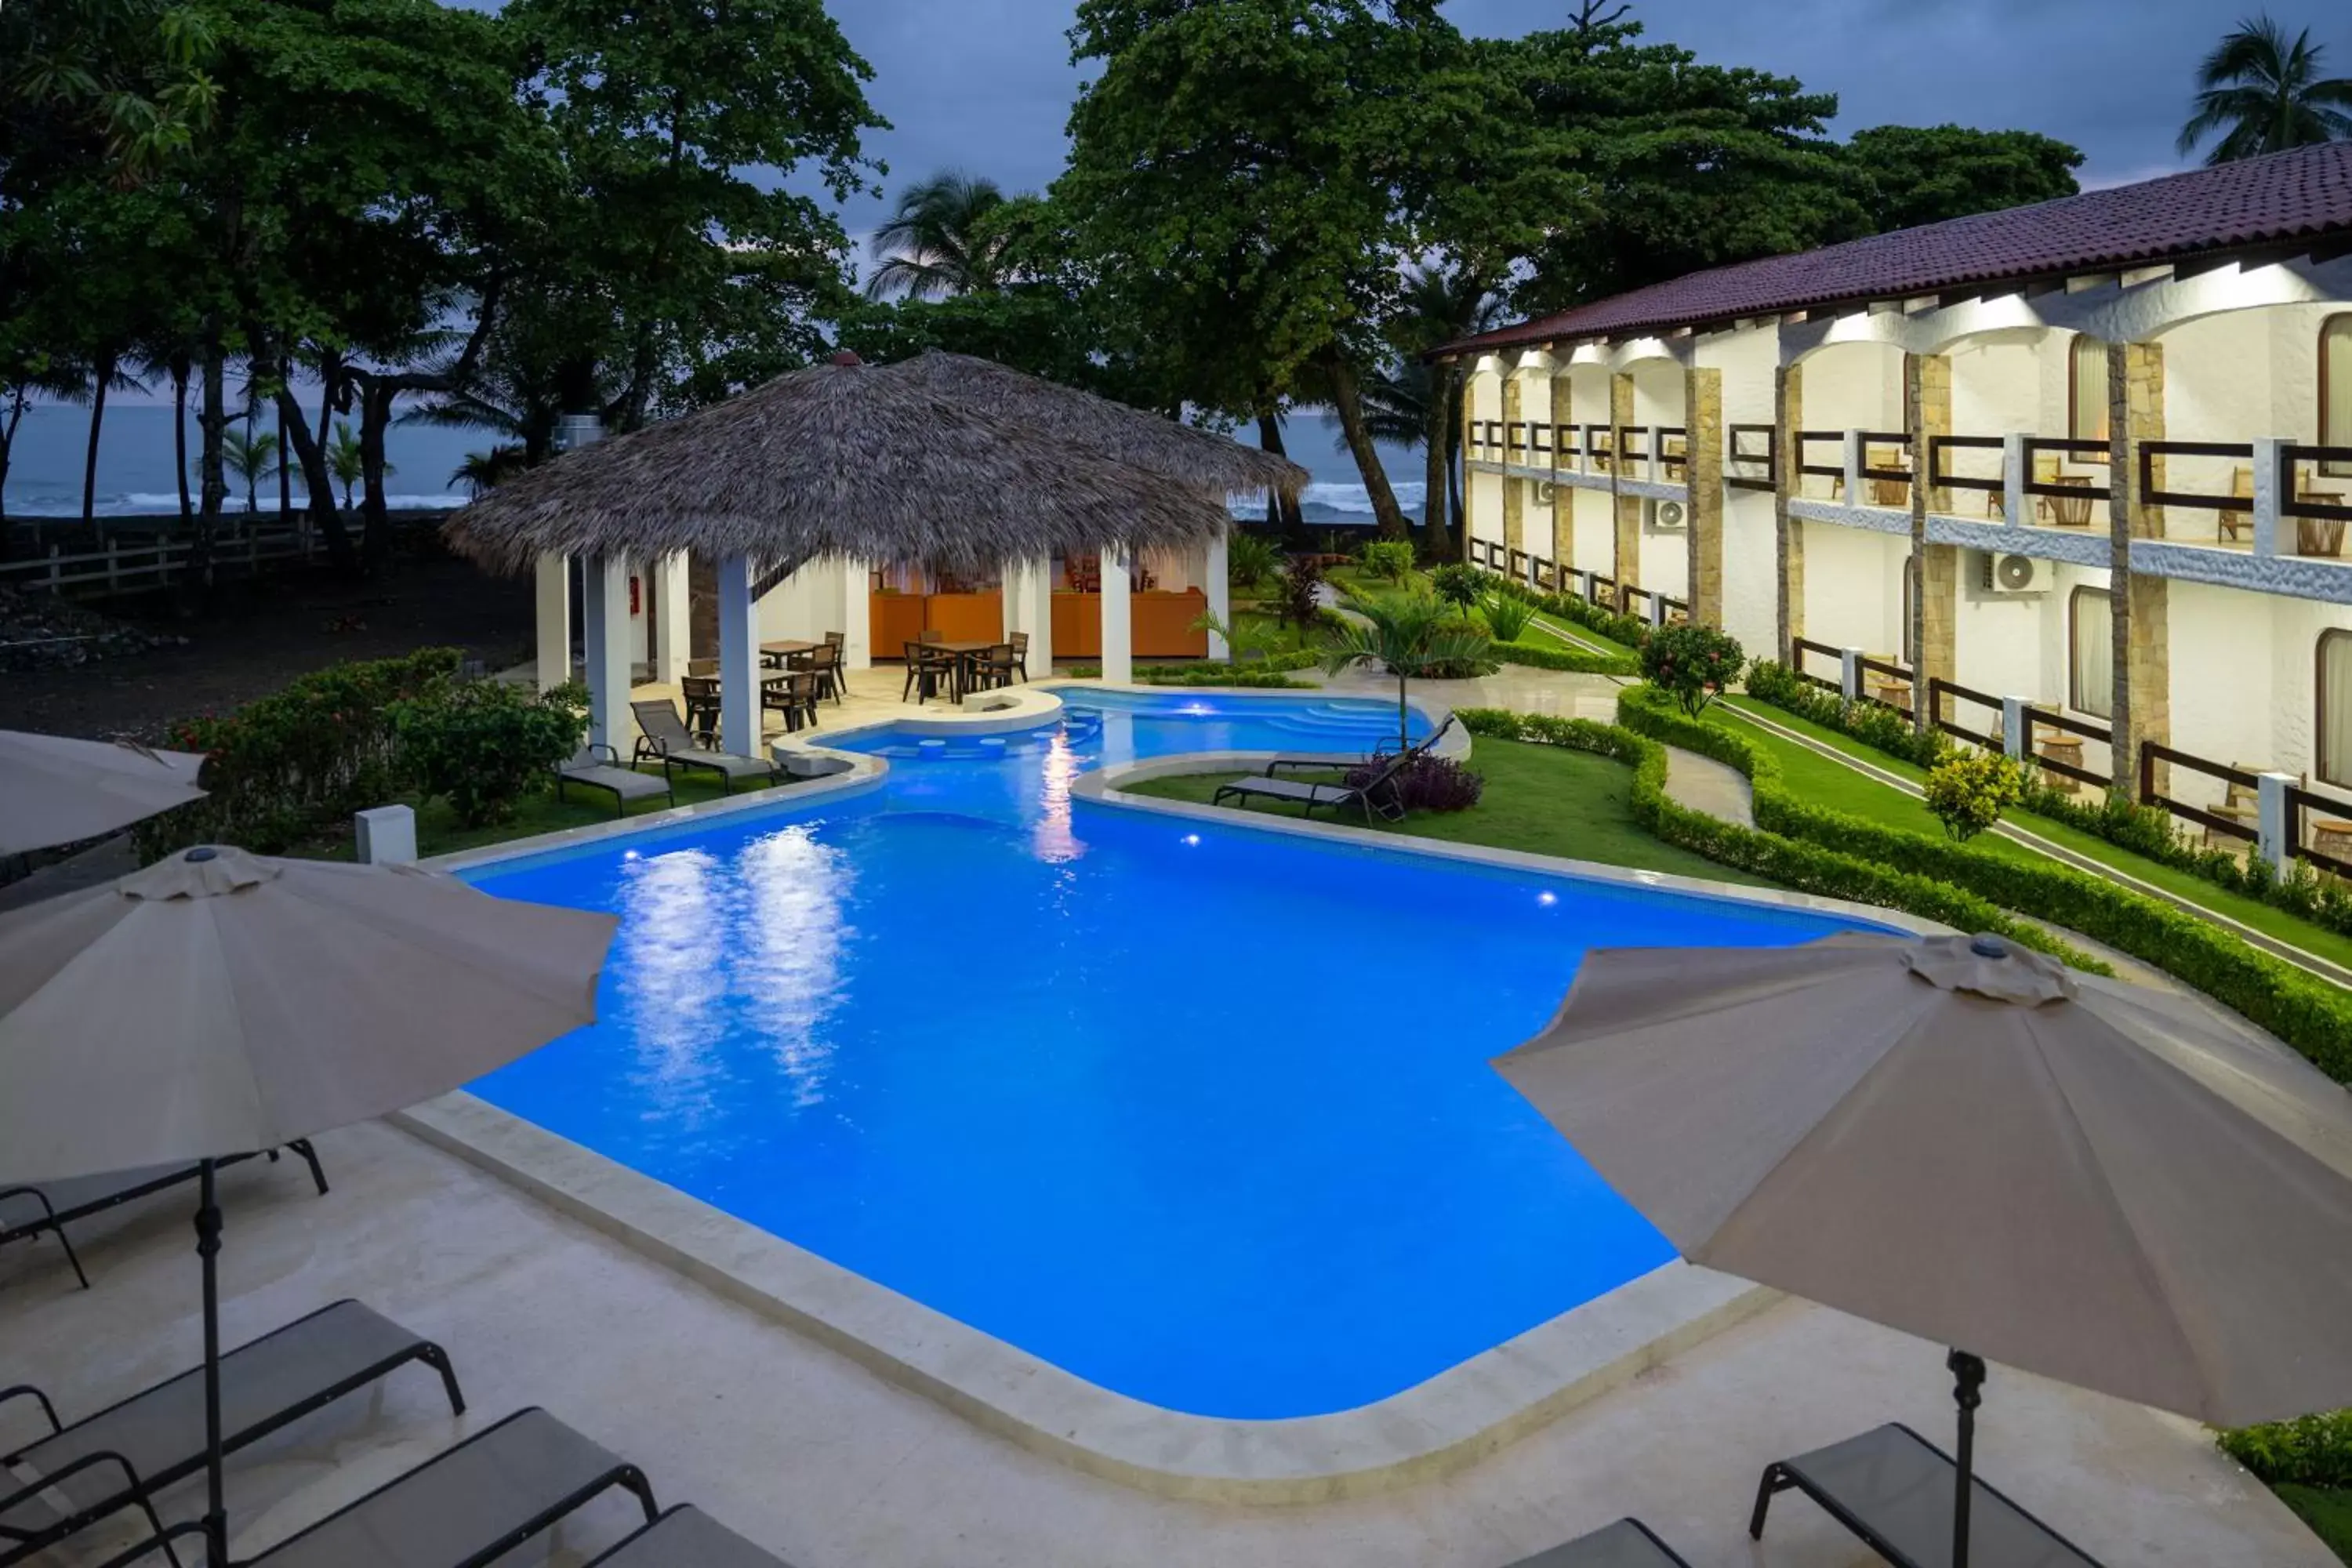 Property building, Swimming Pool in Fuego del Sol Beachfront Hotel